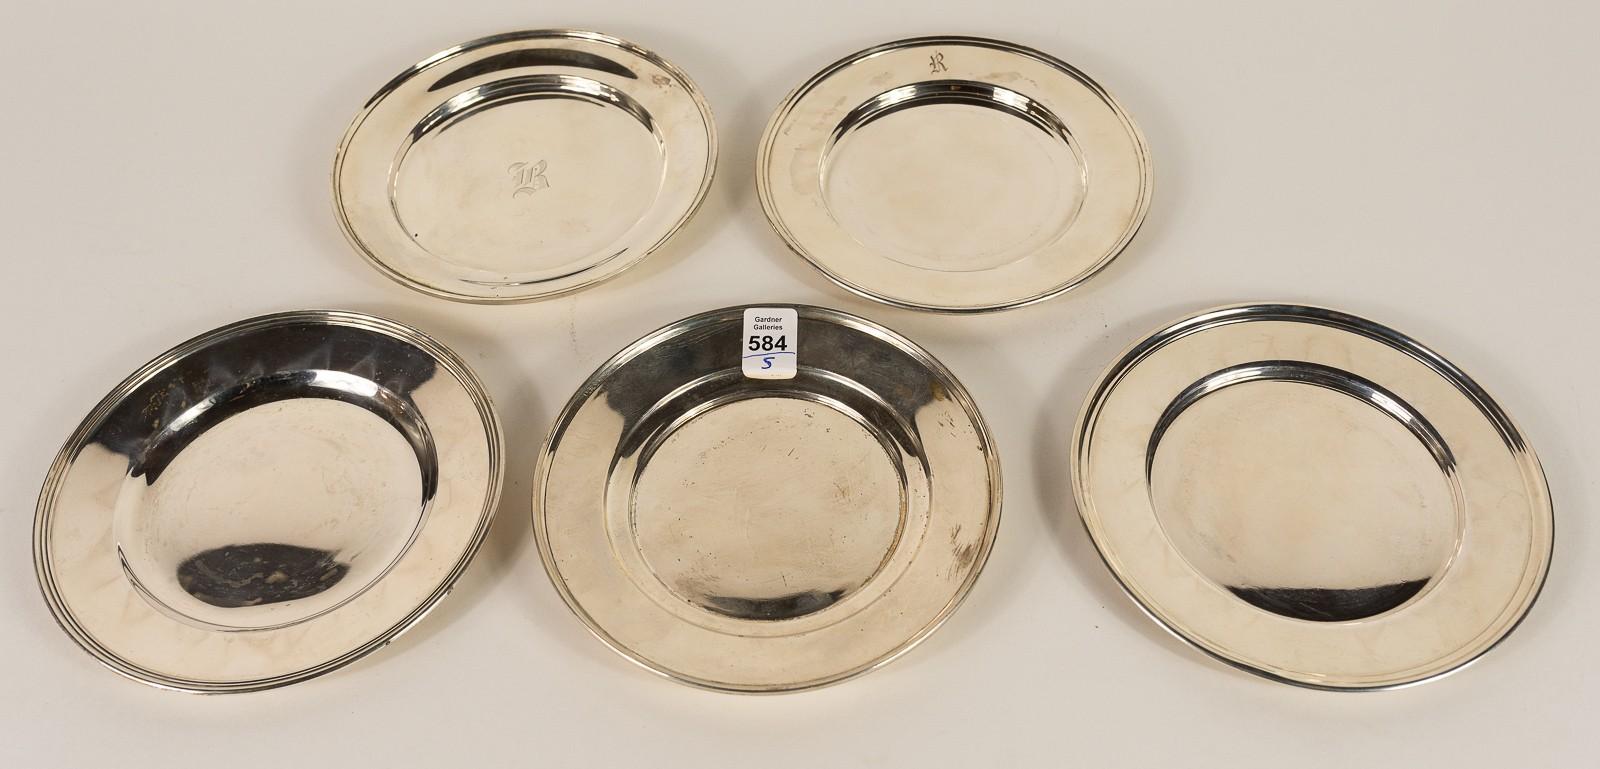 FIVE STERLING BREAD & BUTTER PLATES